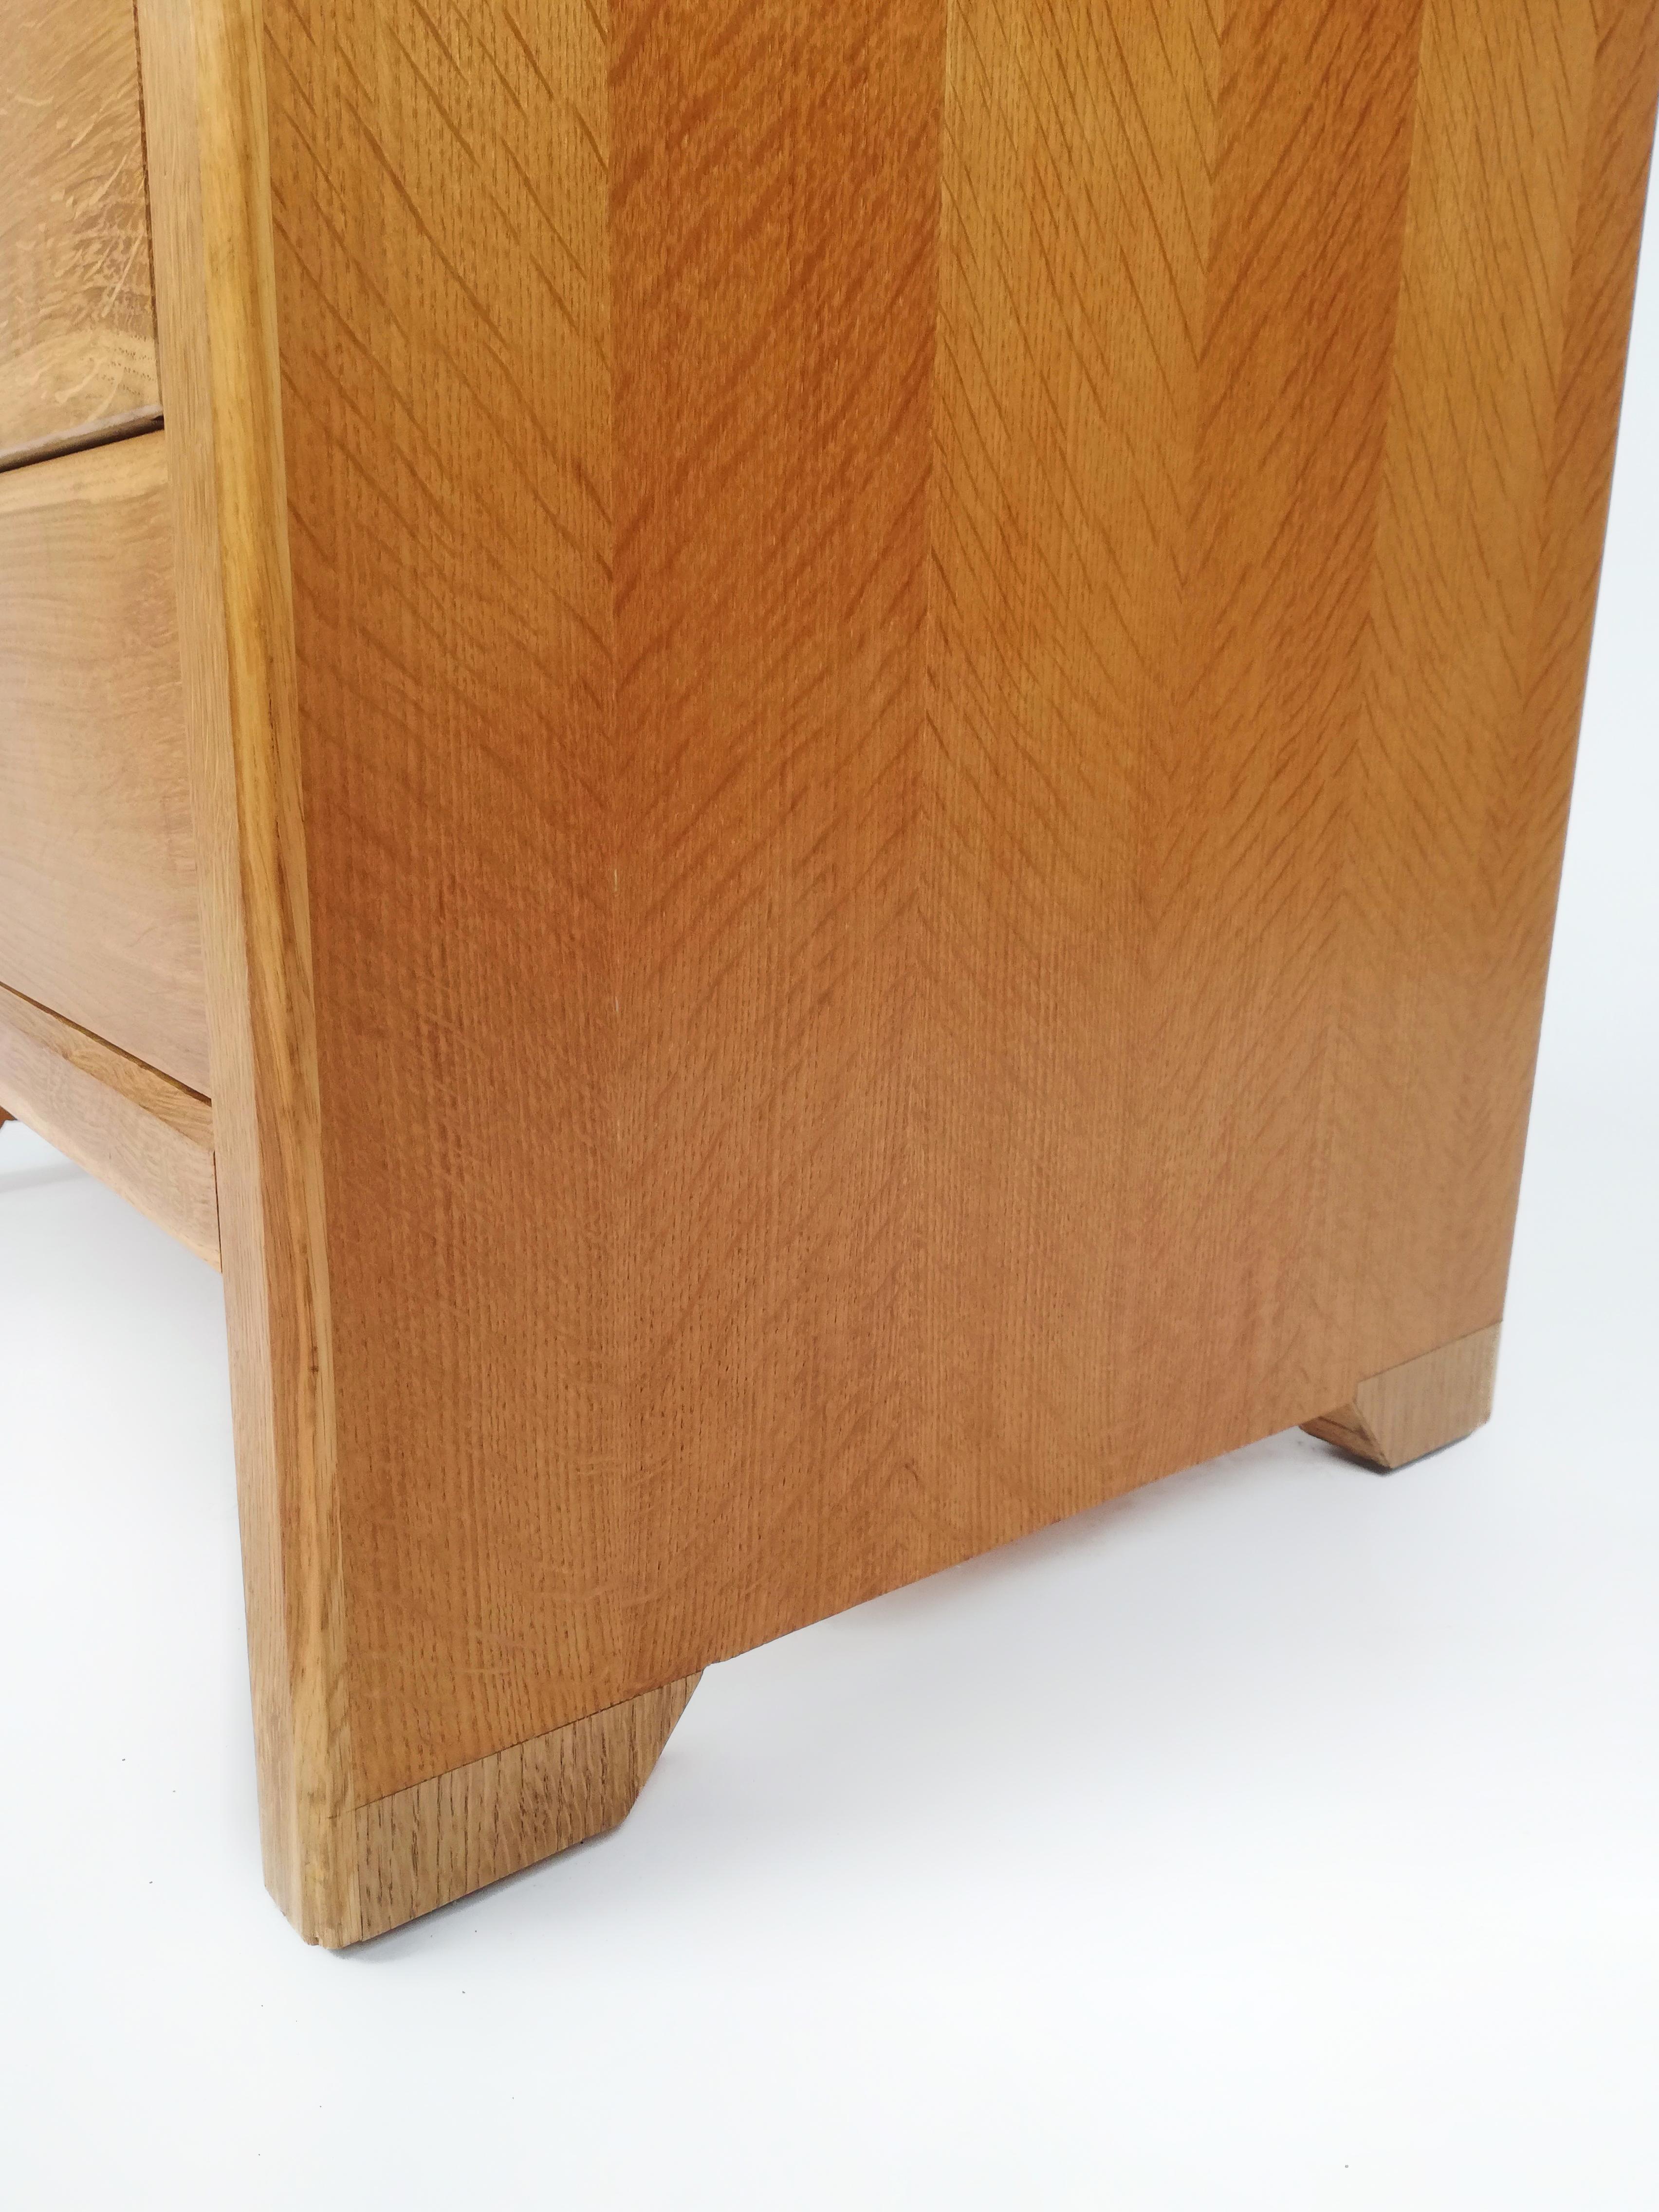 Italian Vintage Oak and Birch Wood Office Tallboy Chest of Drawers, 1960s For Sale 2